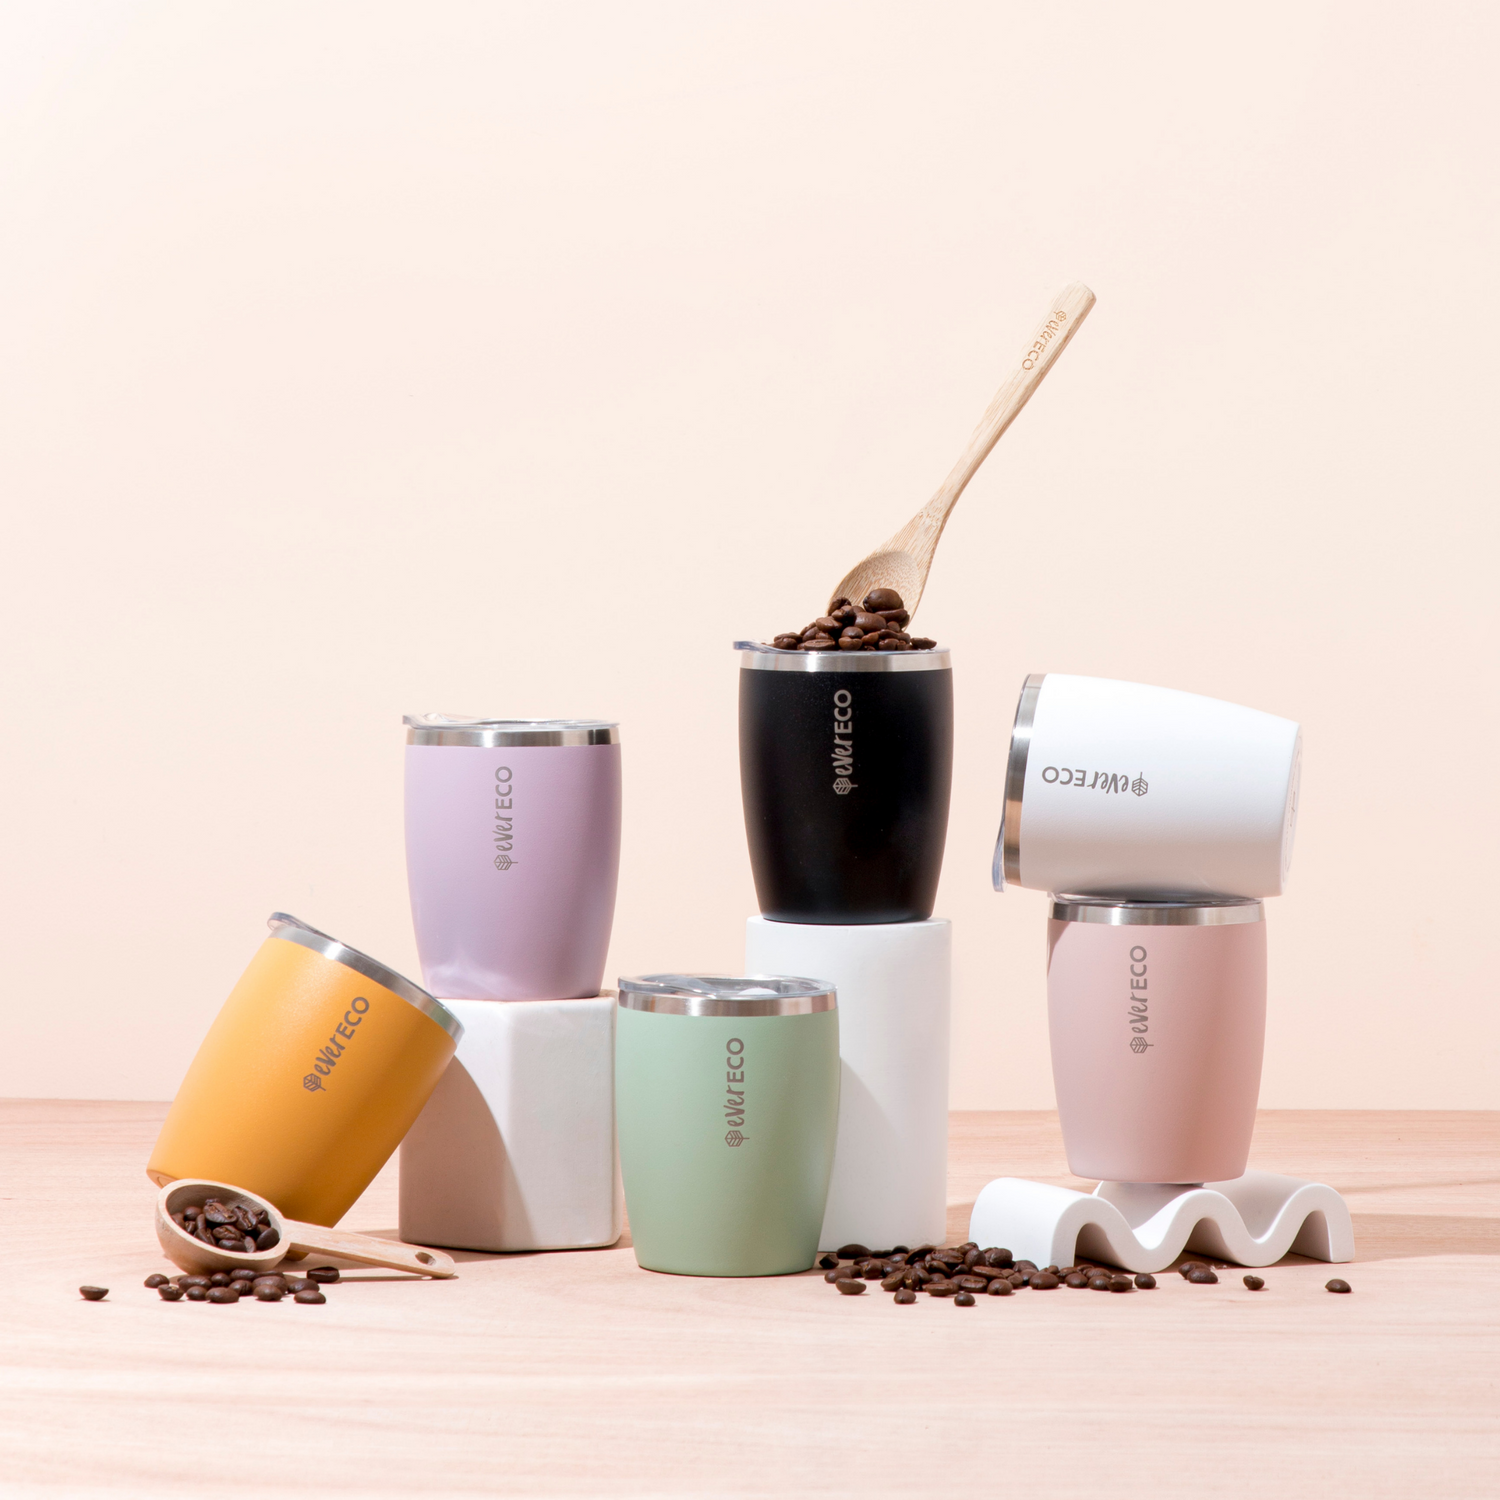 Ever Eco Insulated Coffee Cup Onyx - 295ml